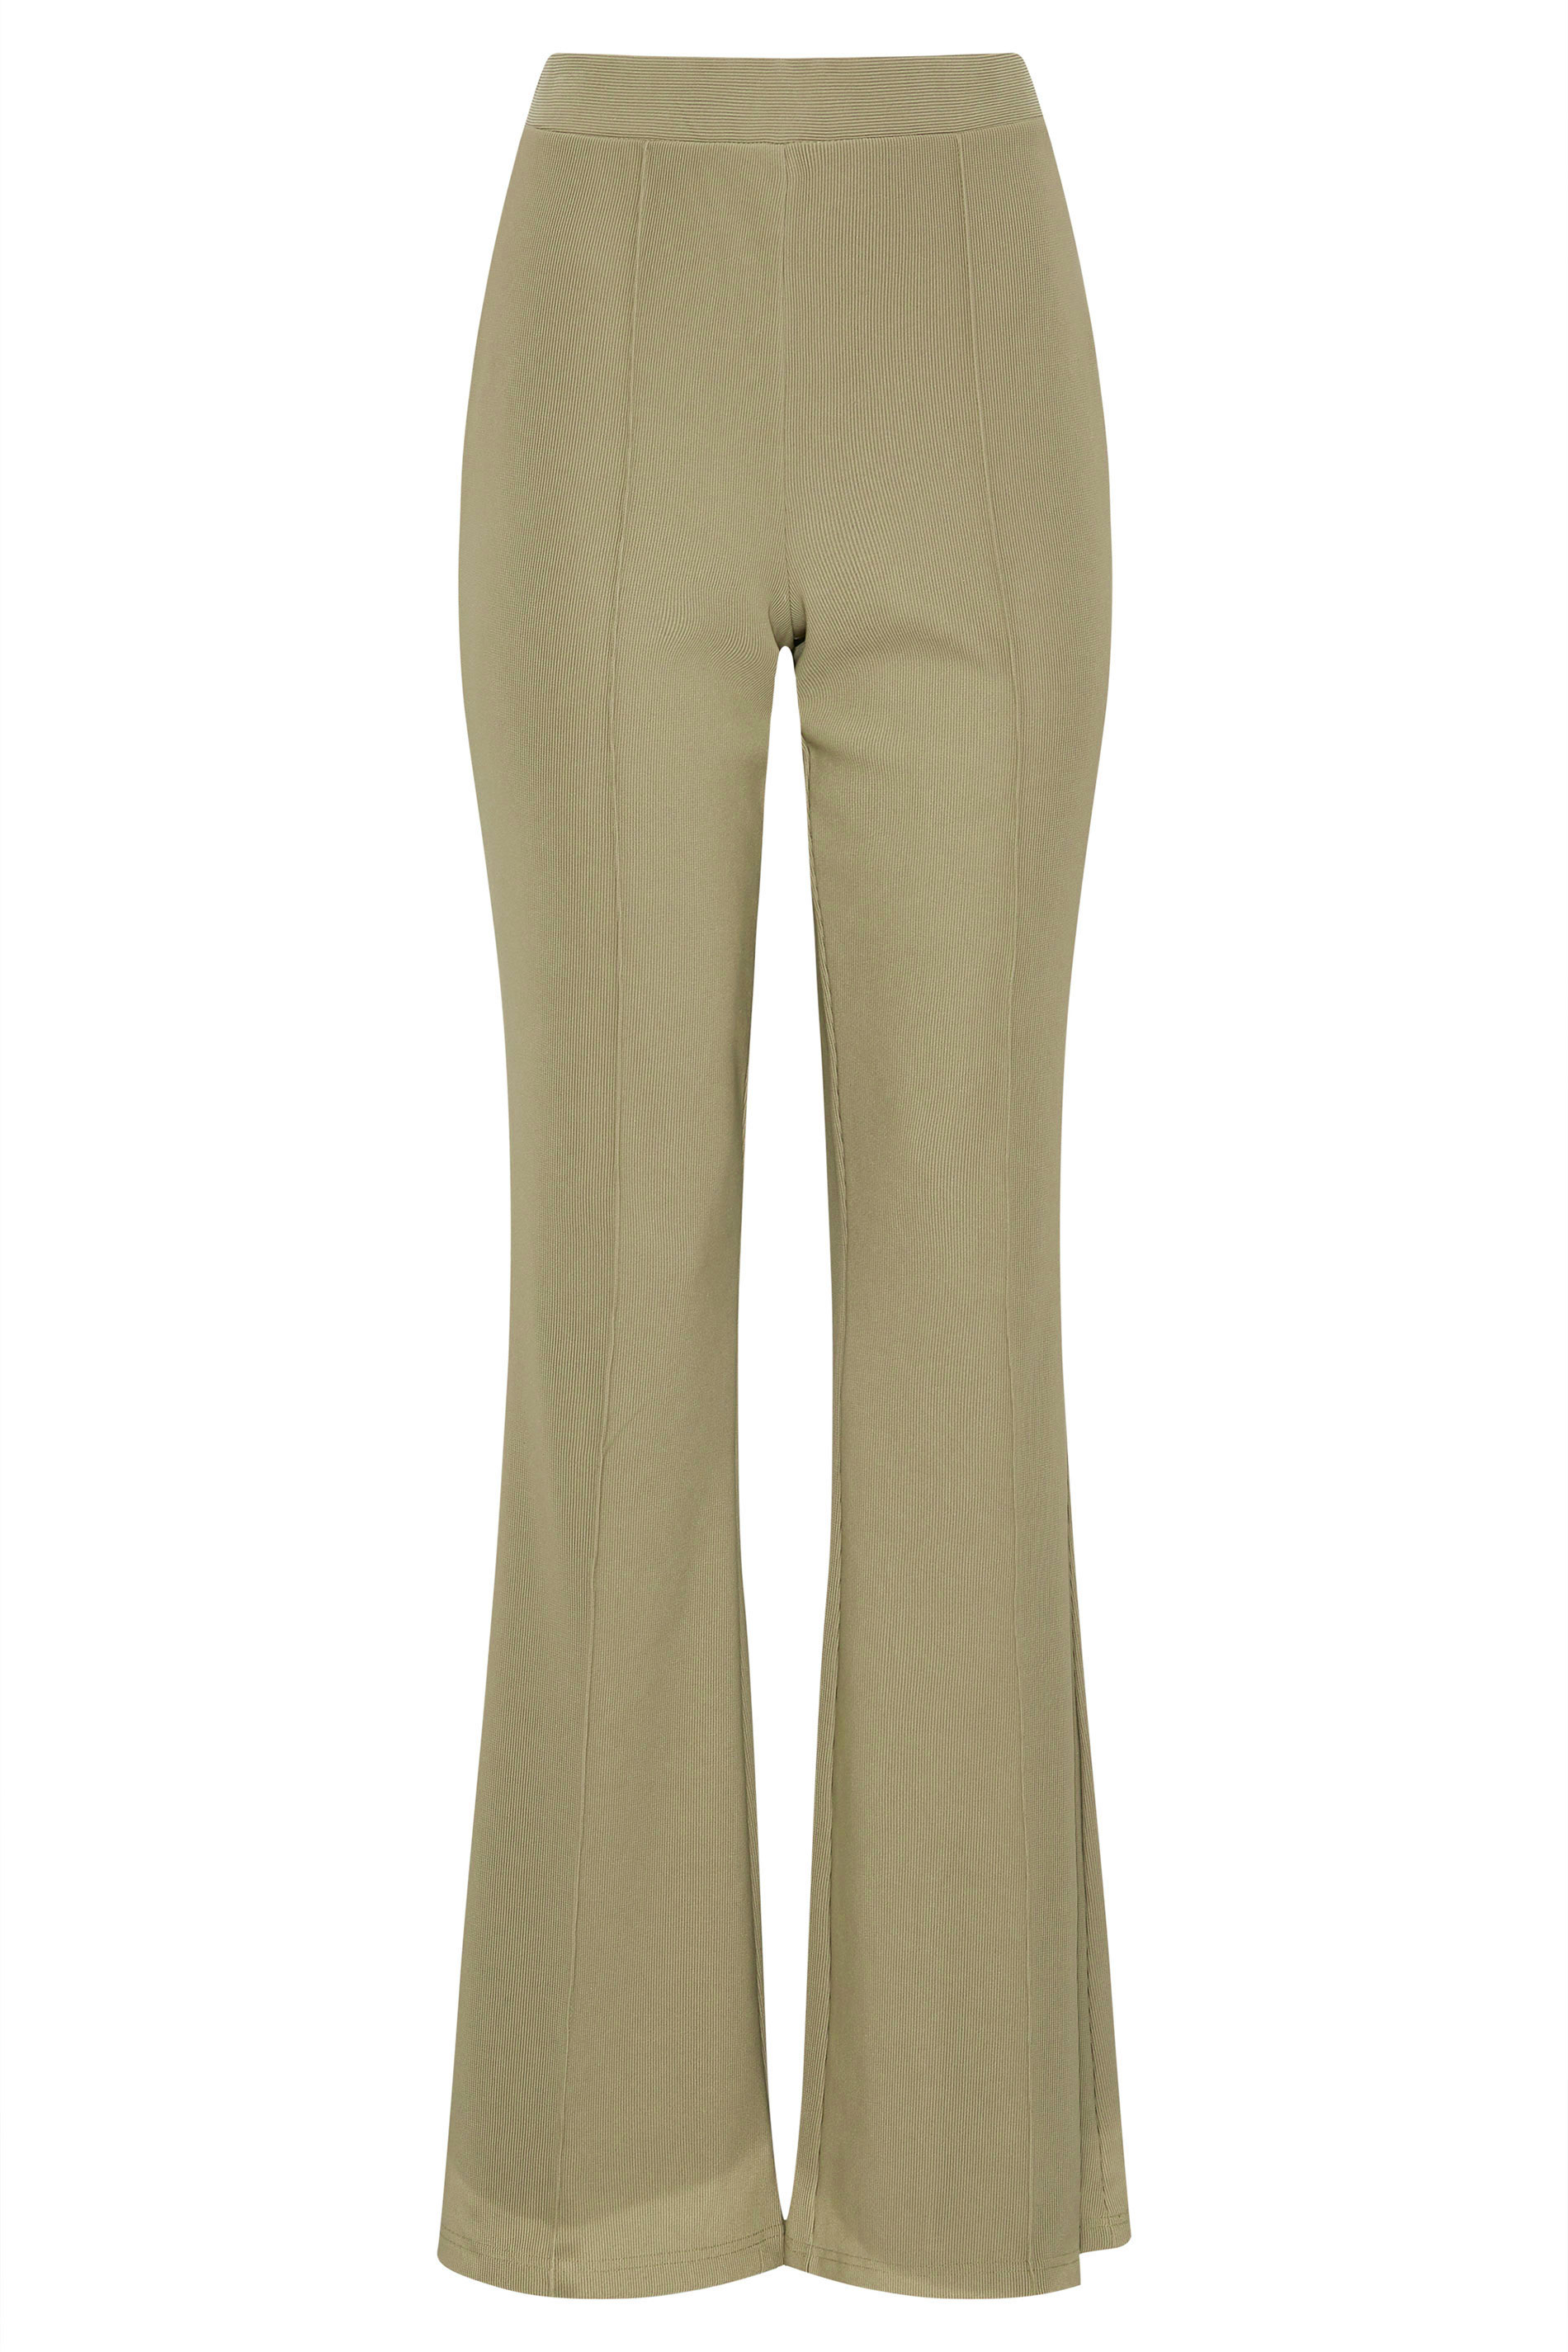 LTS Tall Women's Sage Green Ribbed Kick Flare Trousers | Long Tall Sally 1